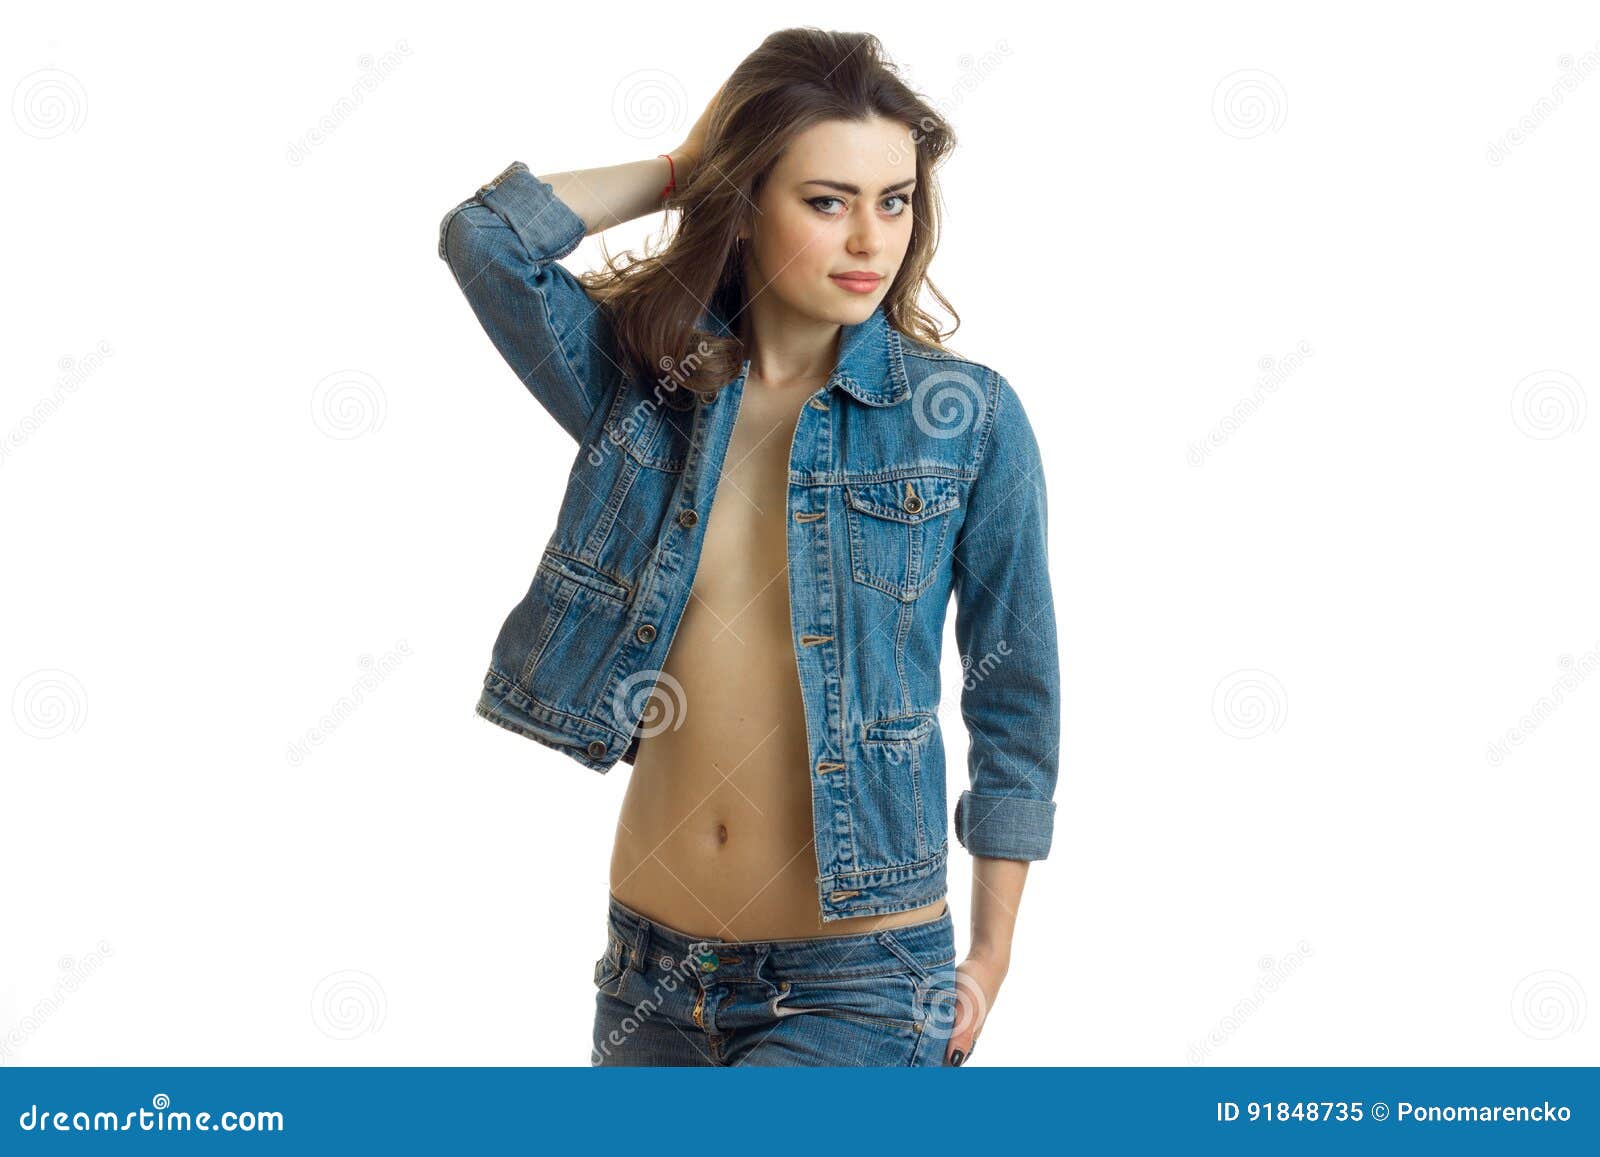 How To Style Denim Jacket For College – Belle Indiana